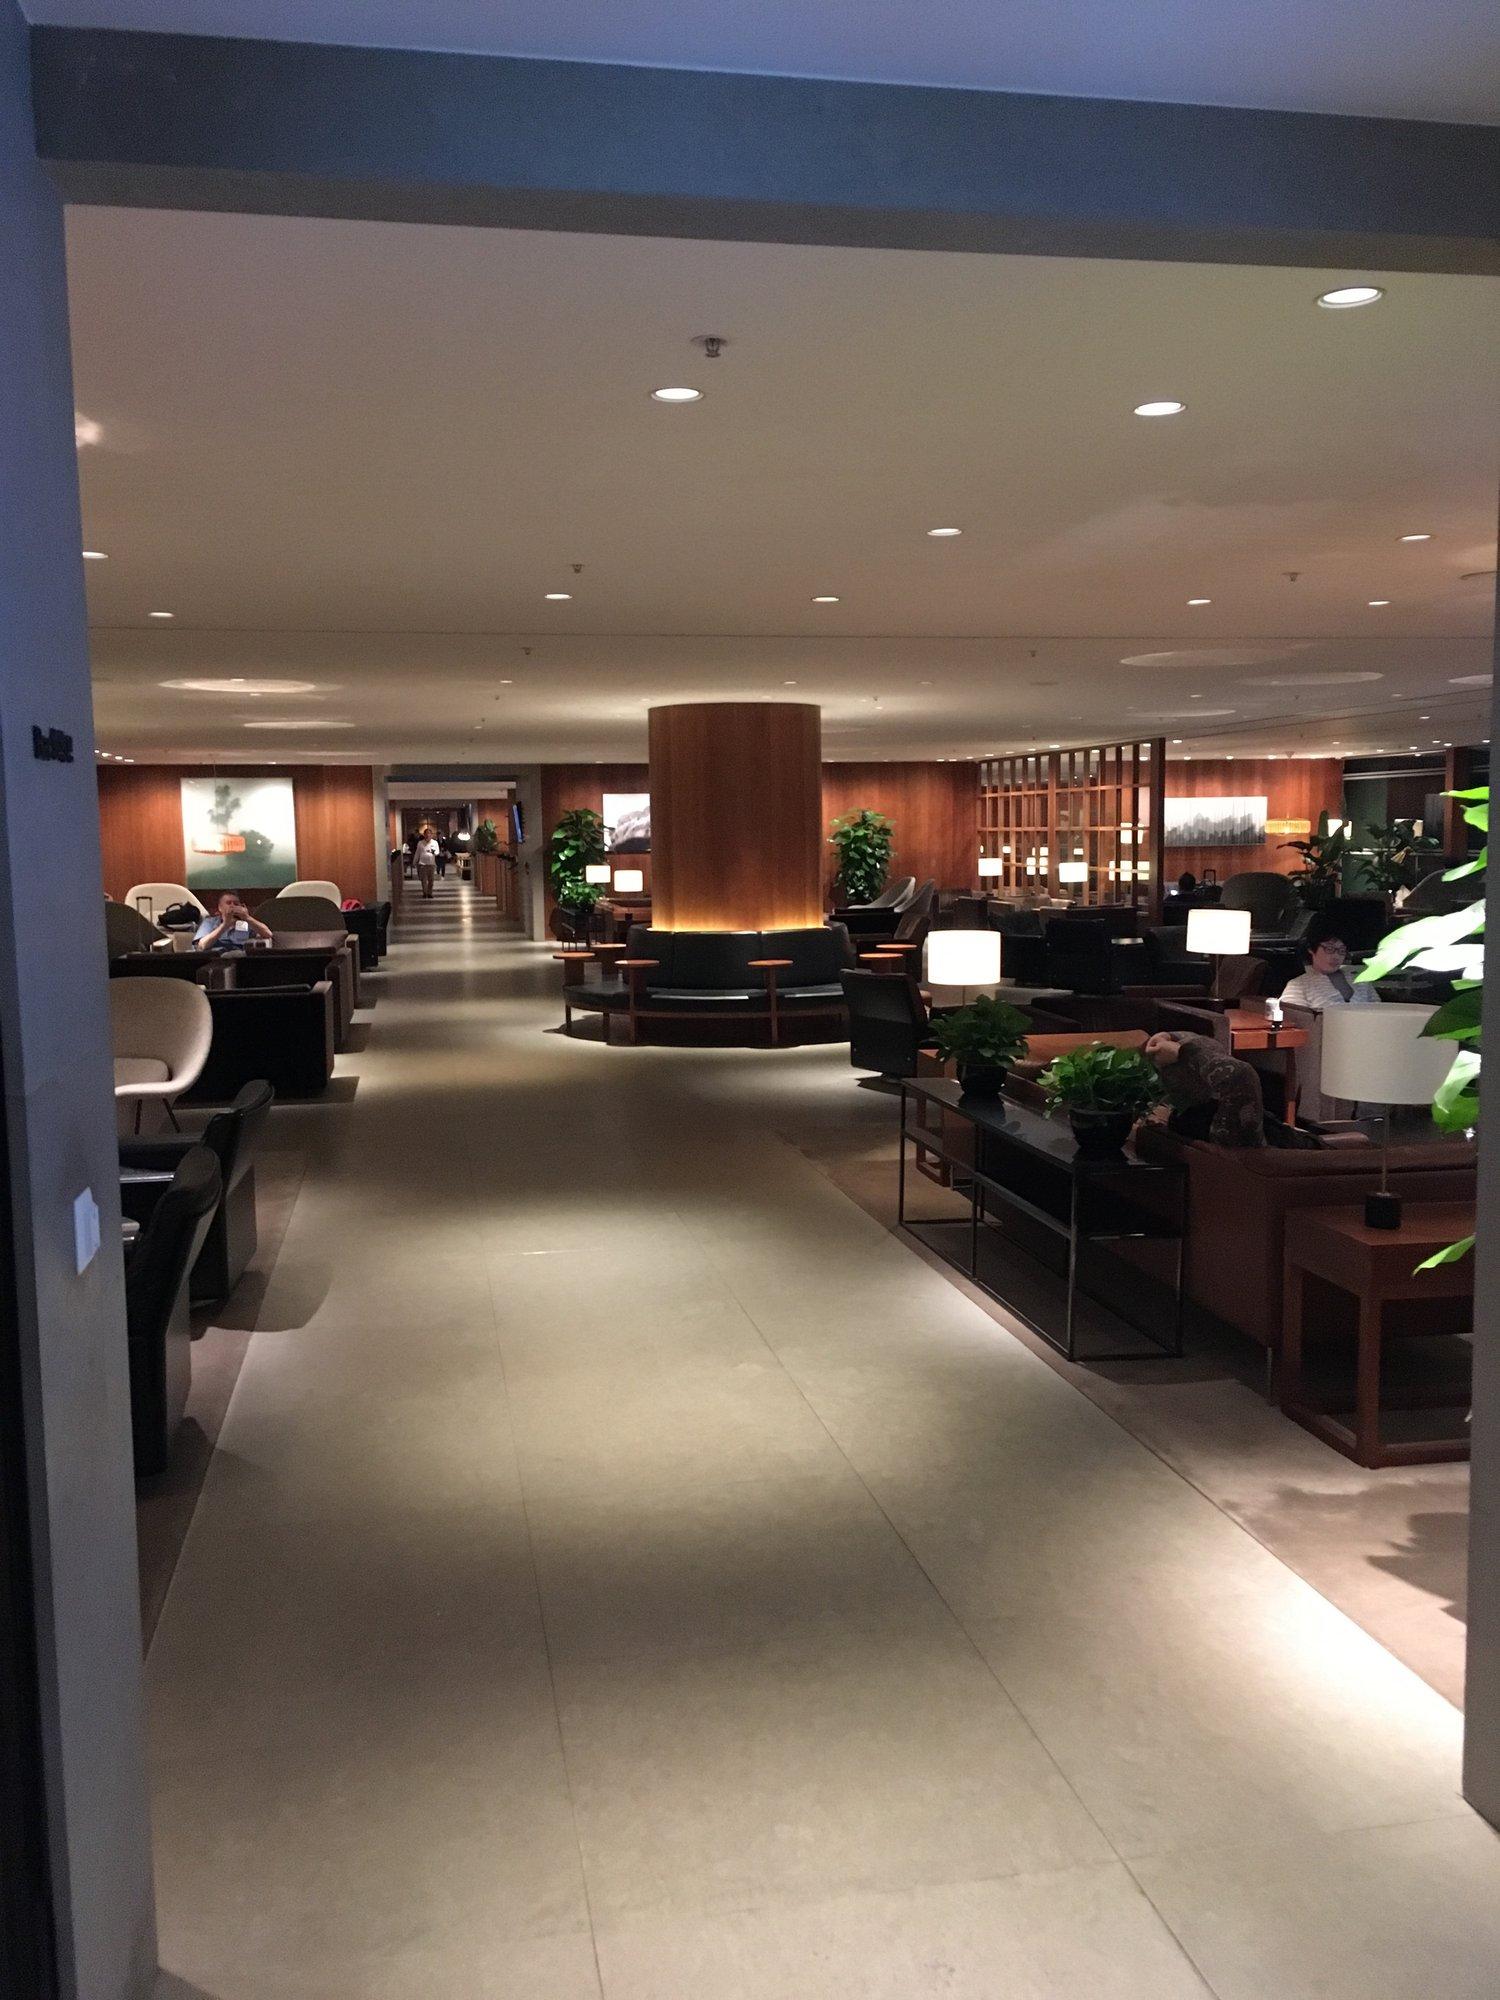 Cathay Pacific The Pier Business Class Lounge image 8 of 61